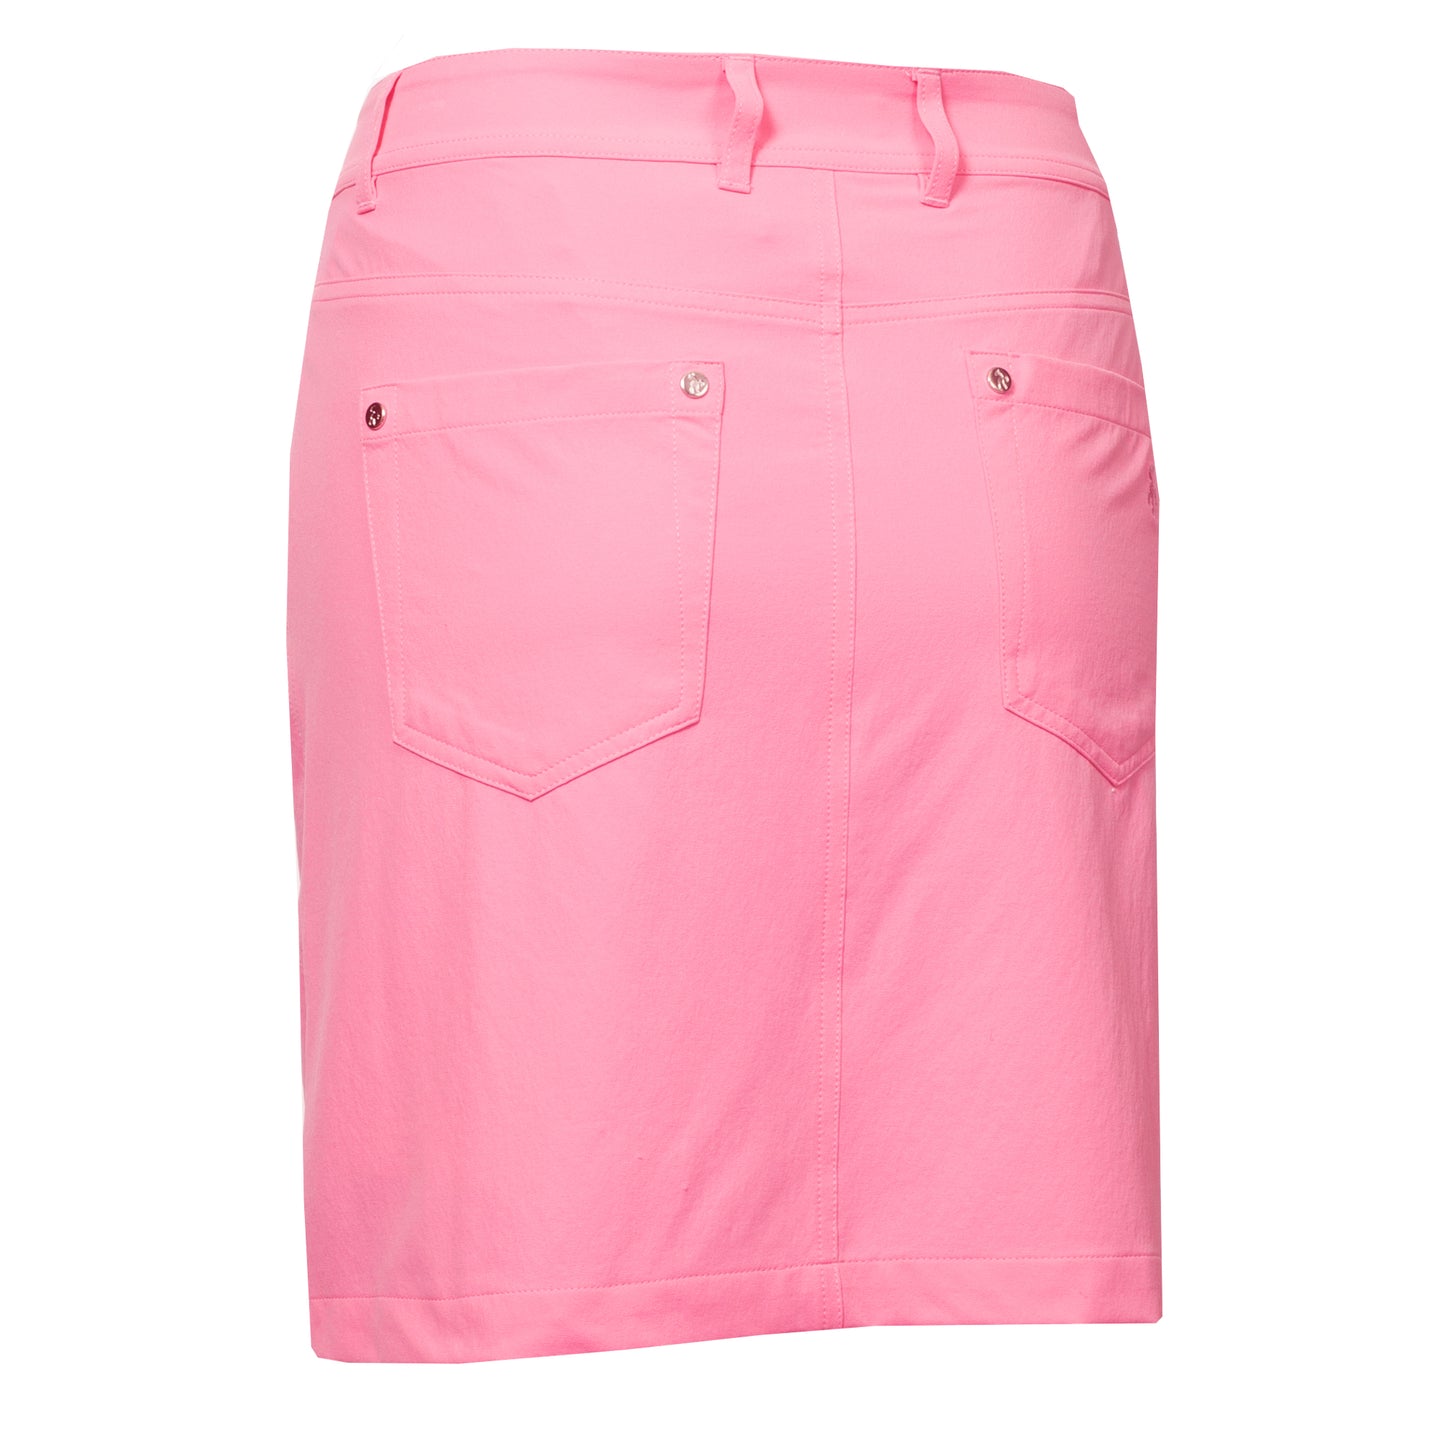 Green Lamb Ladies Stretch Skort with UPF30 Protection in Candy